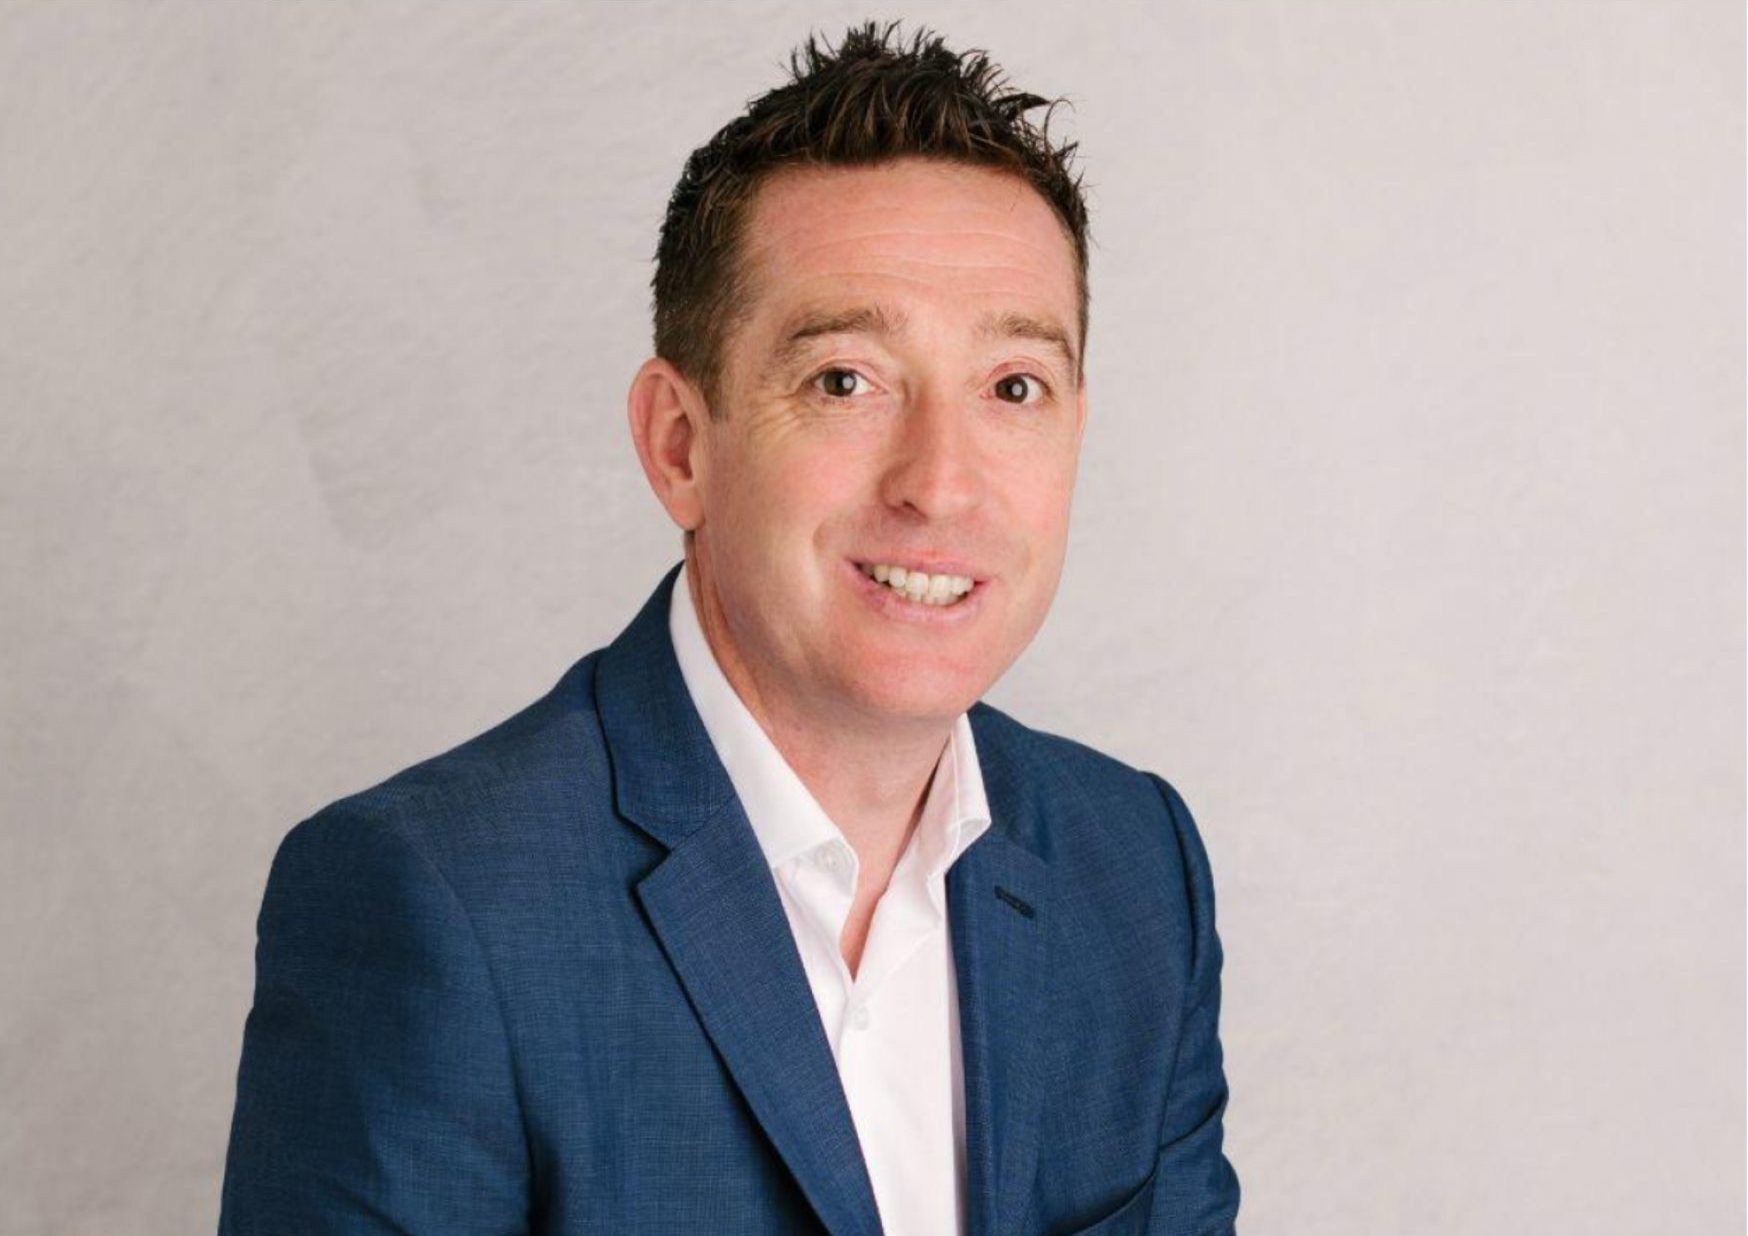 Allan O'Brien, General Manager - Claims, DKG Insurance Brokers